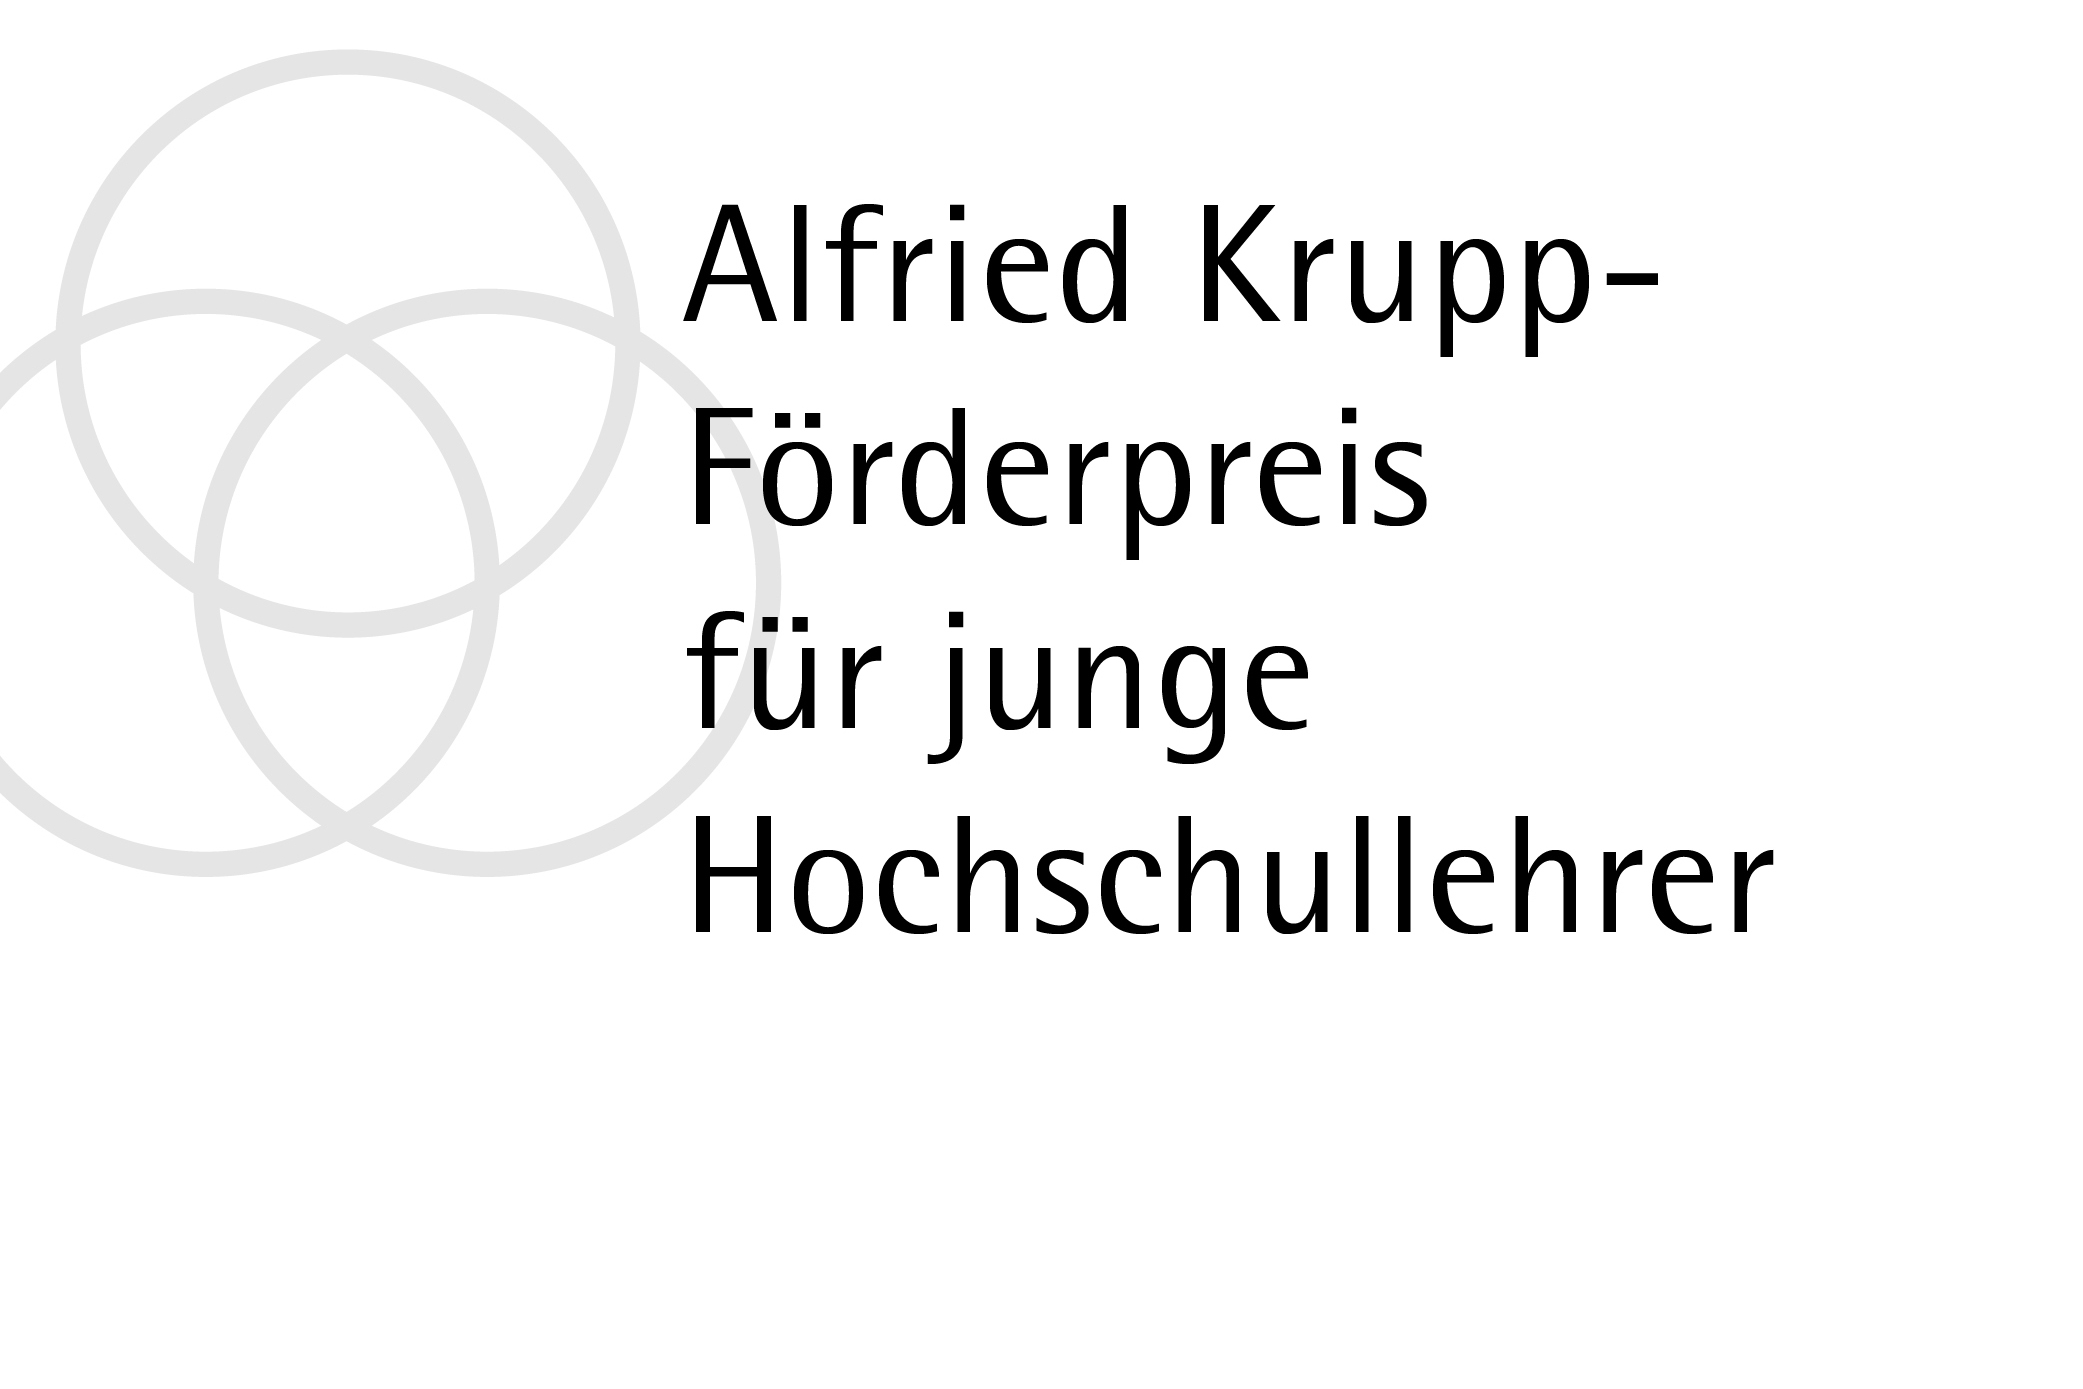 Towards page "Alfried Krupp Prize